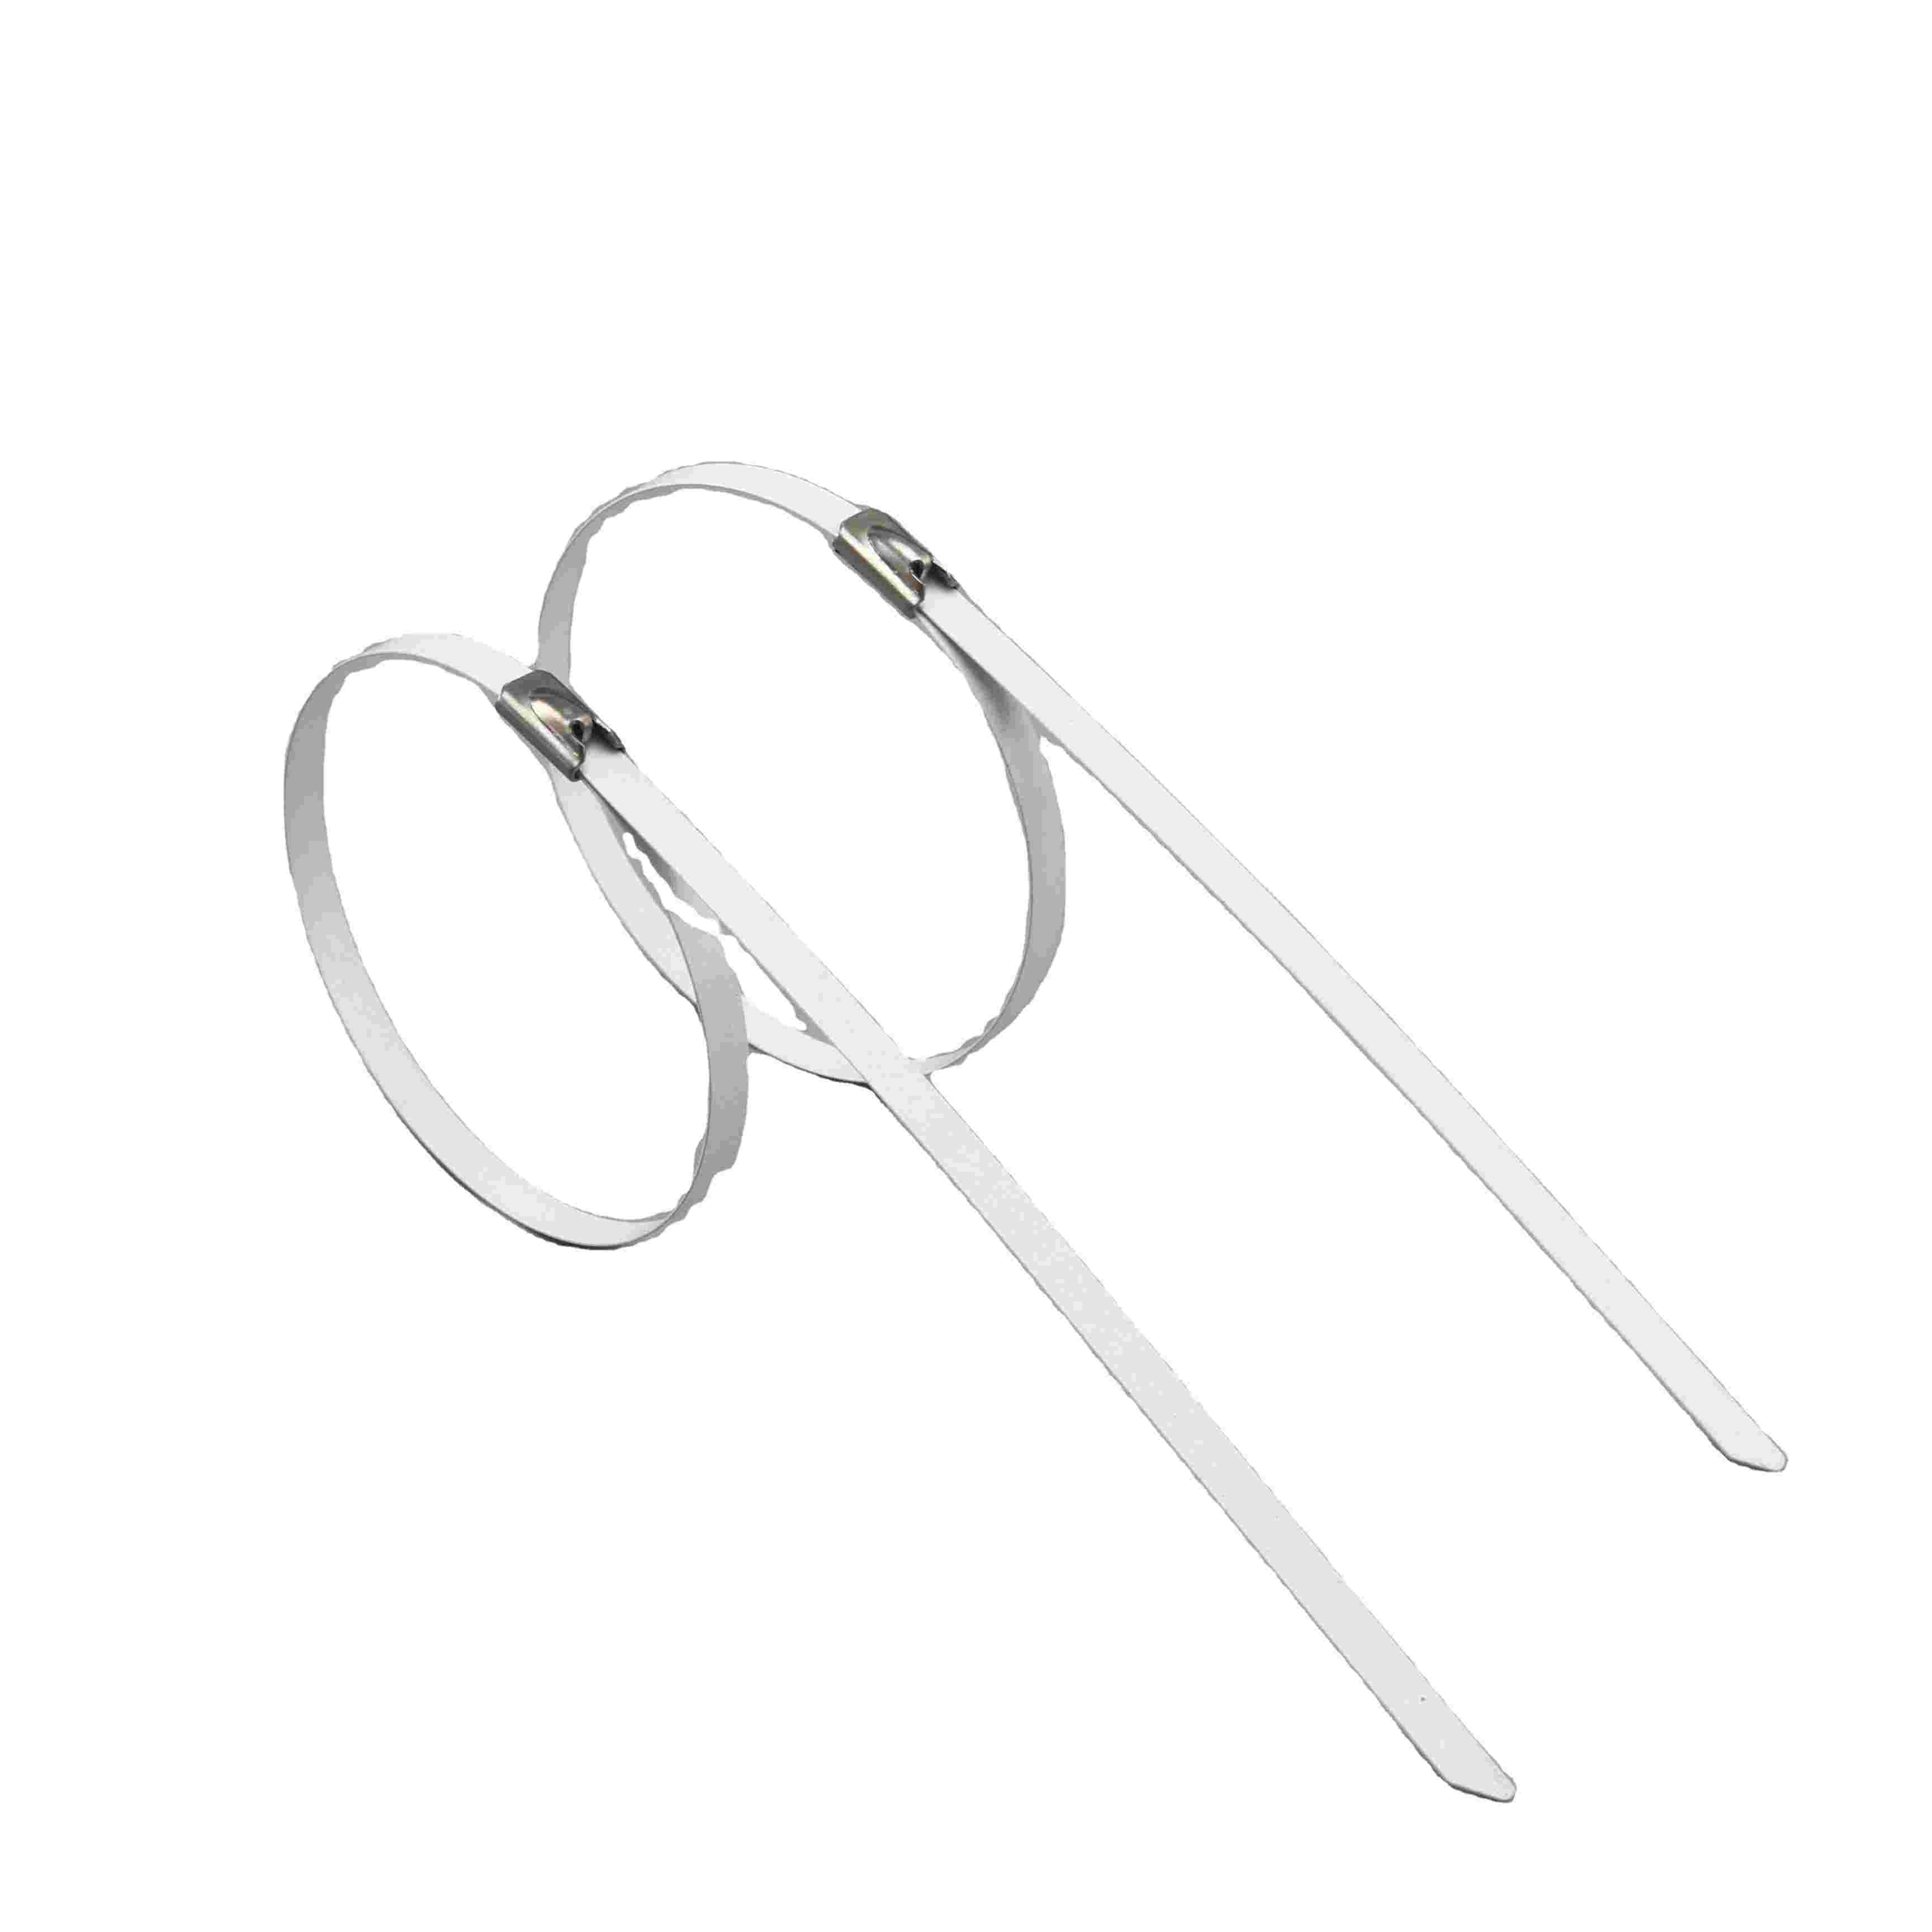 Ball type Stainless Steel Cable Ties - 0